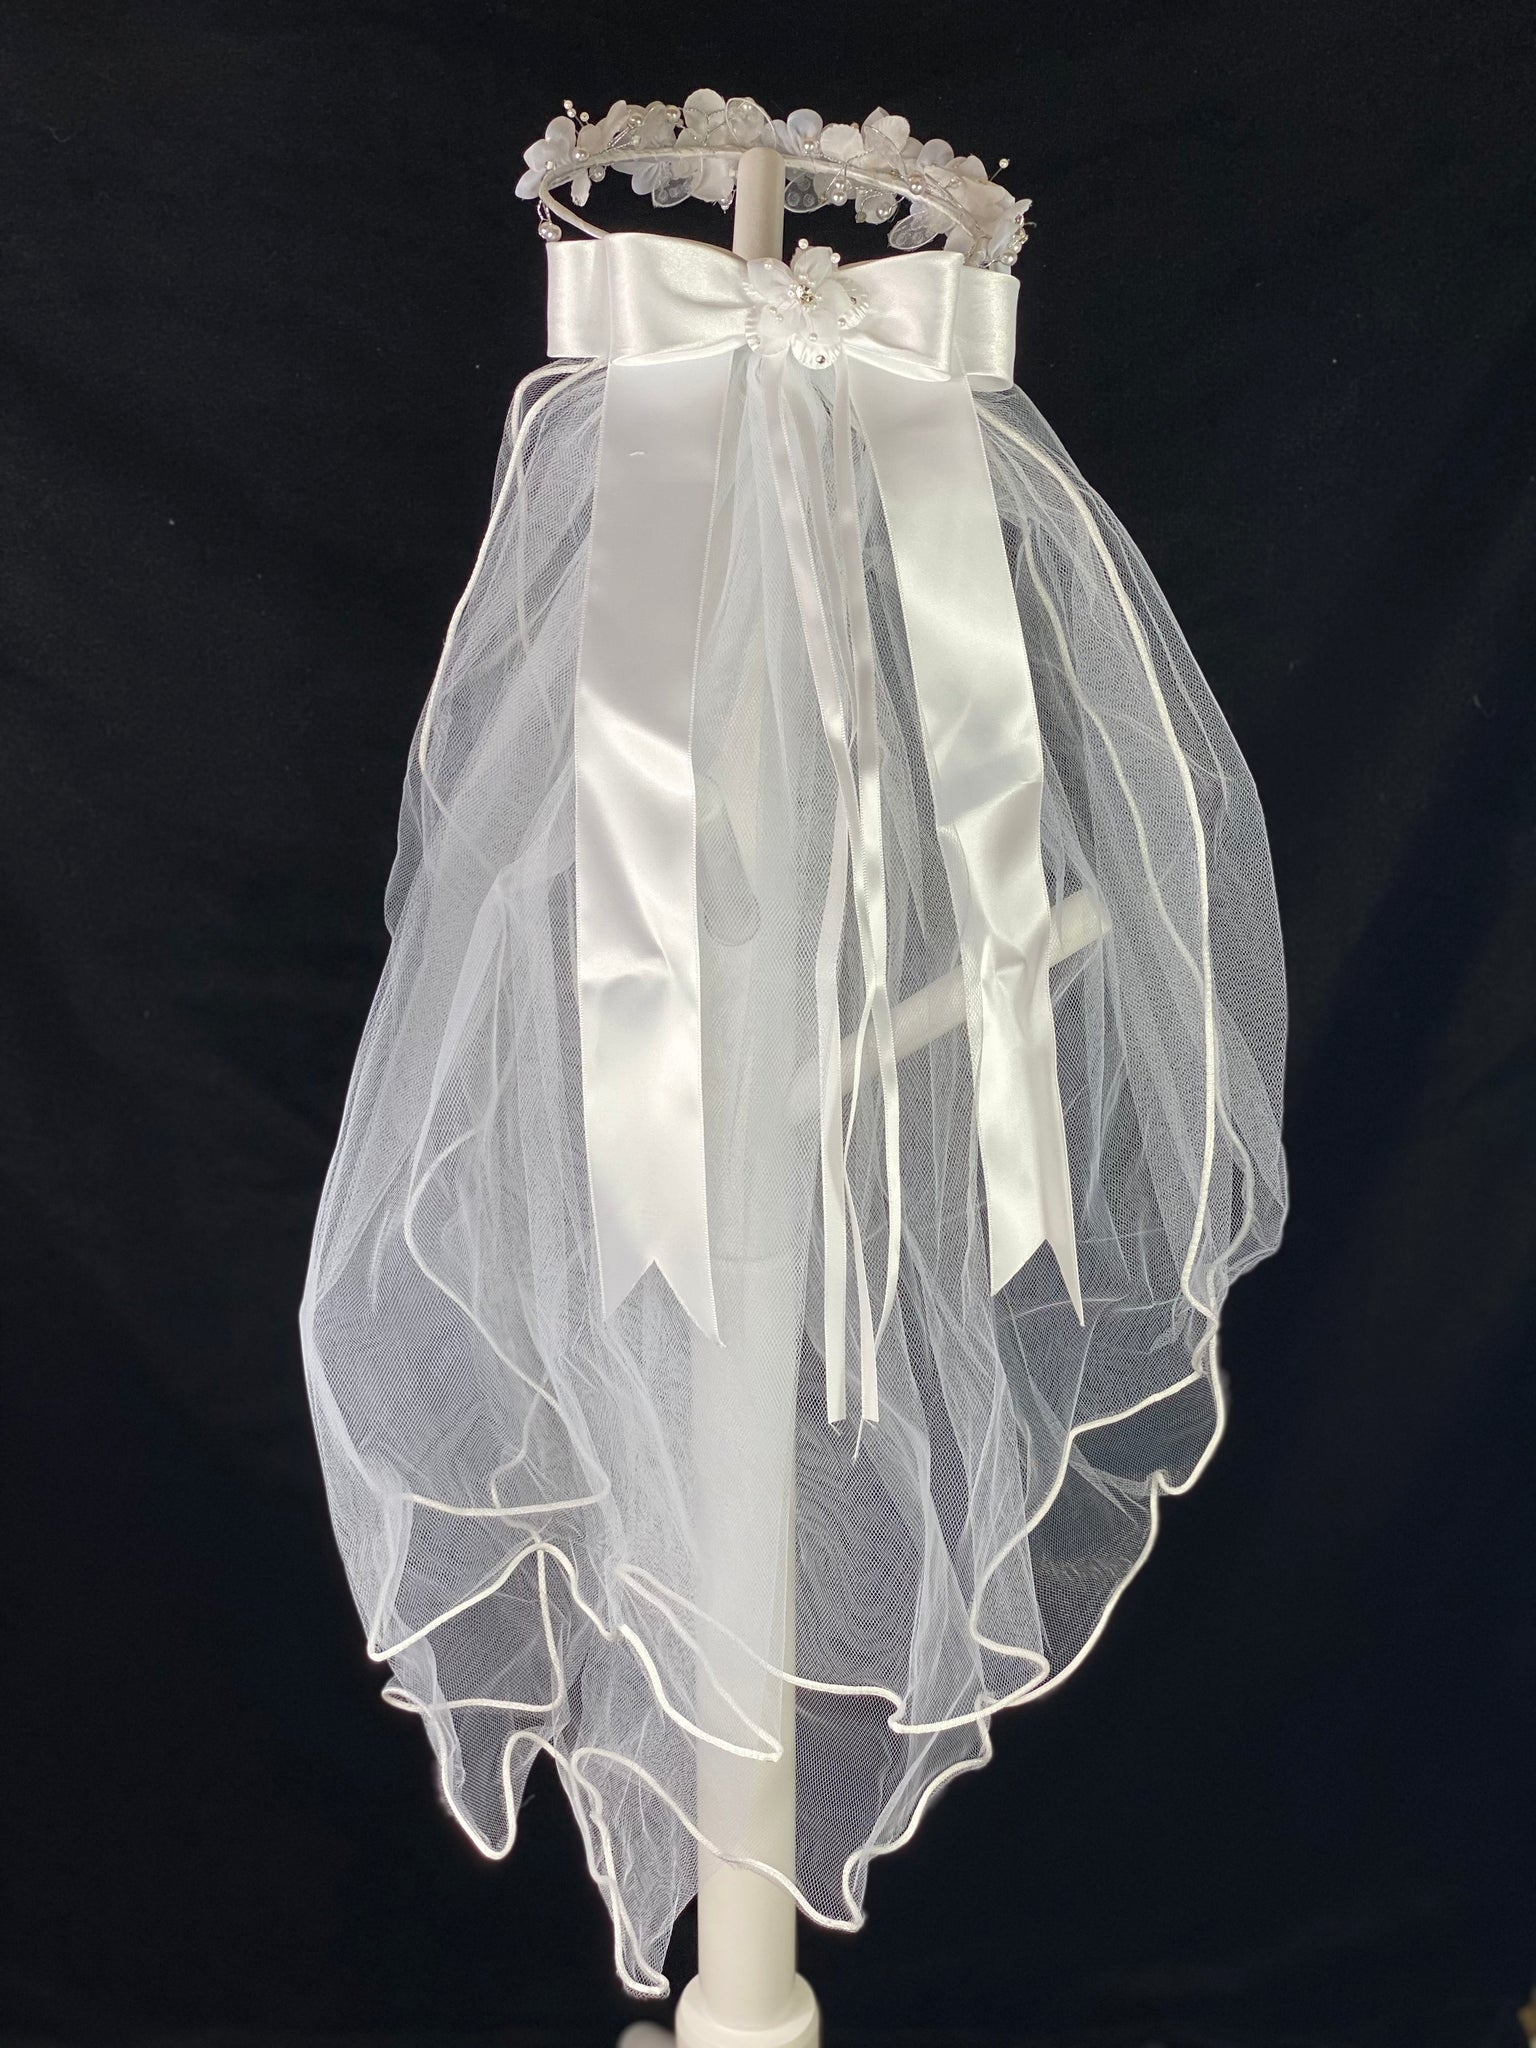 Elegant soft 2 layer tulle veil with delicate hand stitched braided satin trim around the edge and handmade flower halo crown with veil with large white satin bow on back. Stain flowers with sparkling rhinestone petals and centers. Crystal flowers between organza flowers. Beautiful lace leaves sticking out around flowers.  This double layered veil reaches approximately 24" long, with a crown diameter of 6". Veil has 2" long, 3" wide, comb to secure it in place. 